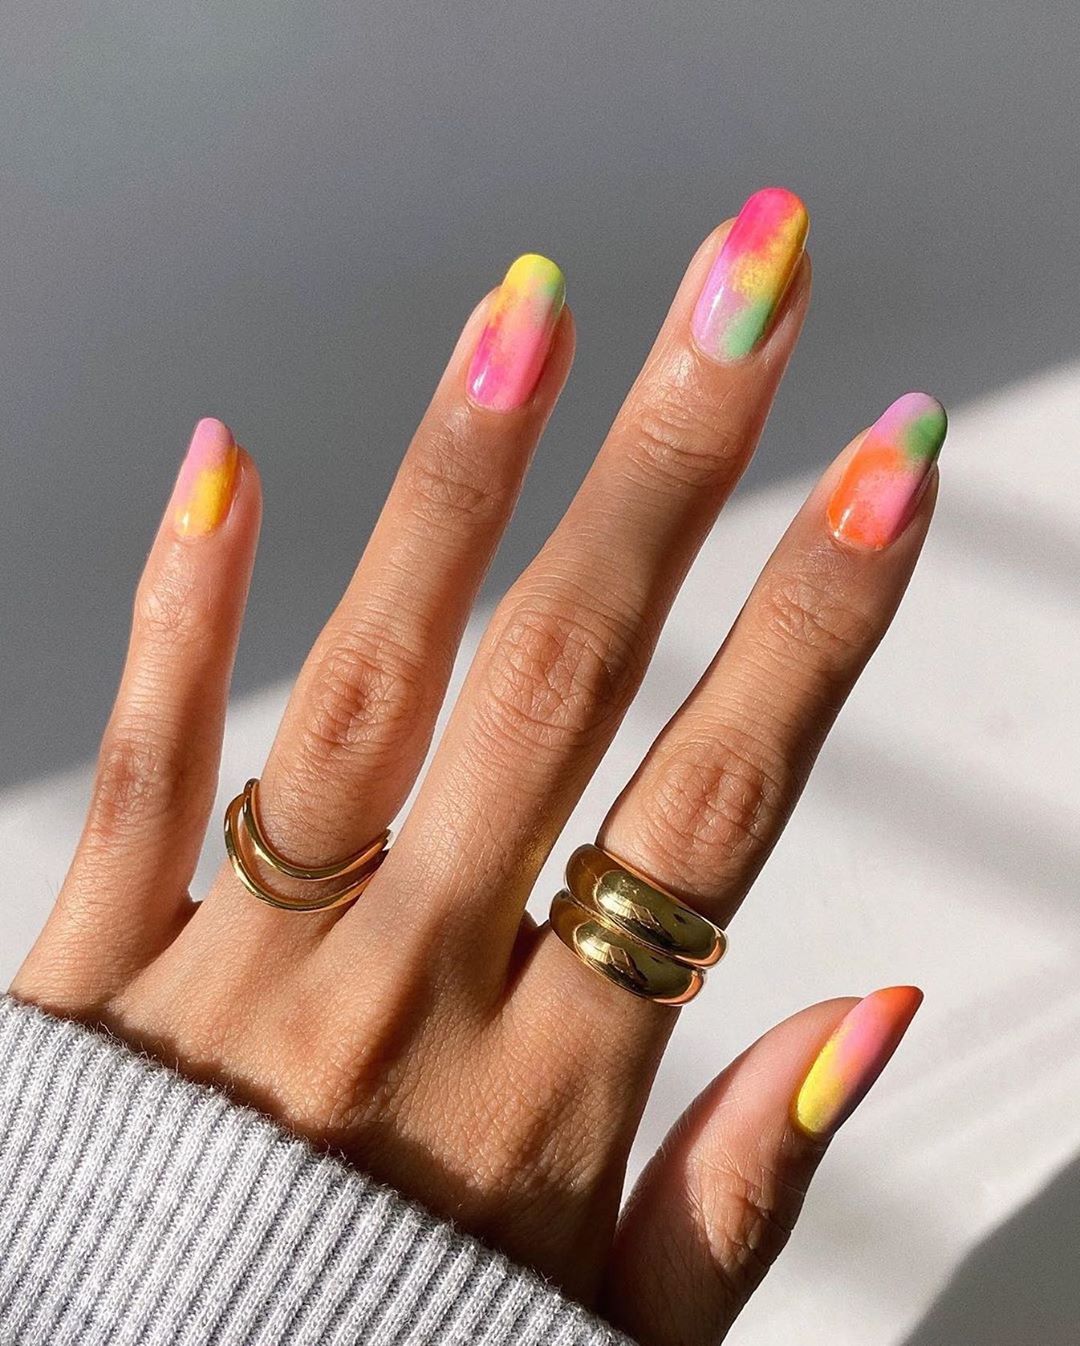 20 of Today's Swoon Worthy 😍 Nail Inspo for Mani-obsessed 💅🏼people 😍 ...